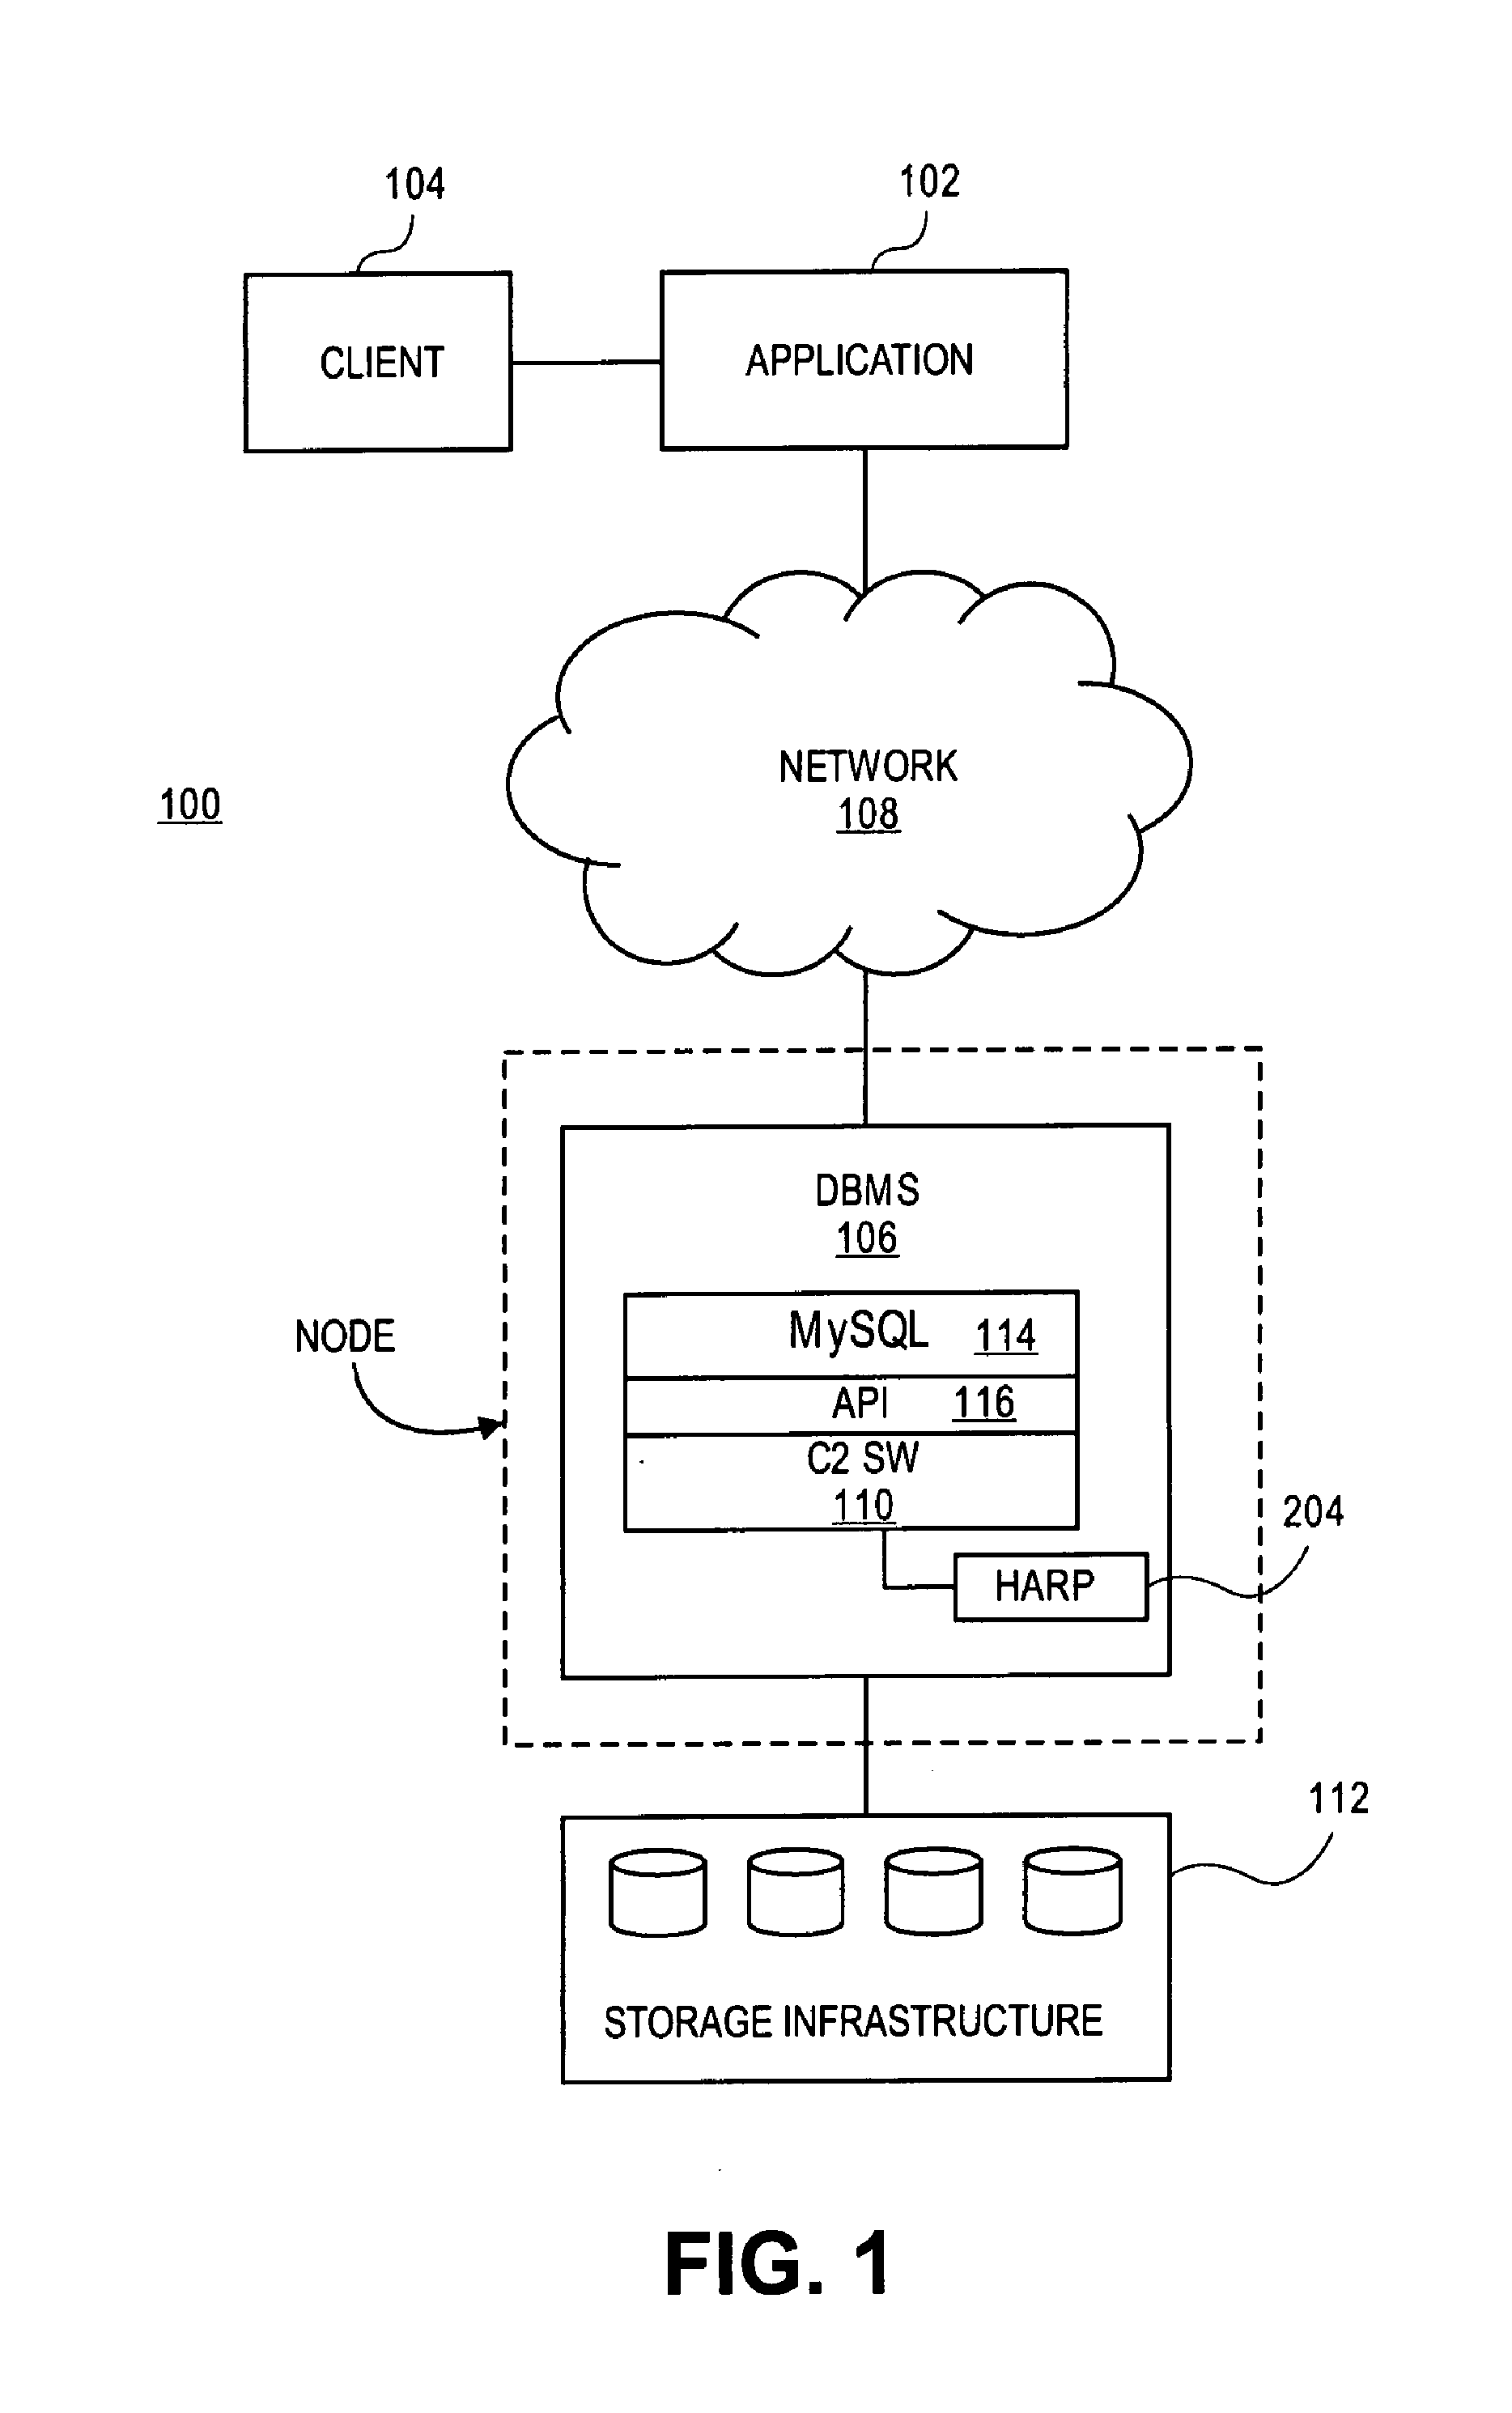 Hardware accelerated reconfigurable processor for accelerating database operations and queries